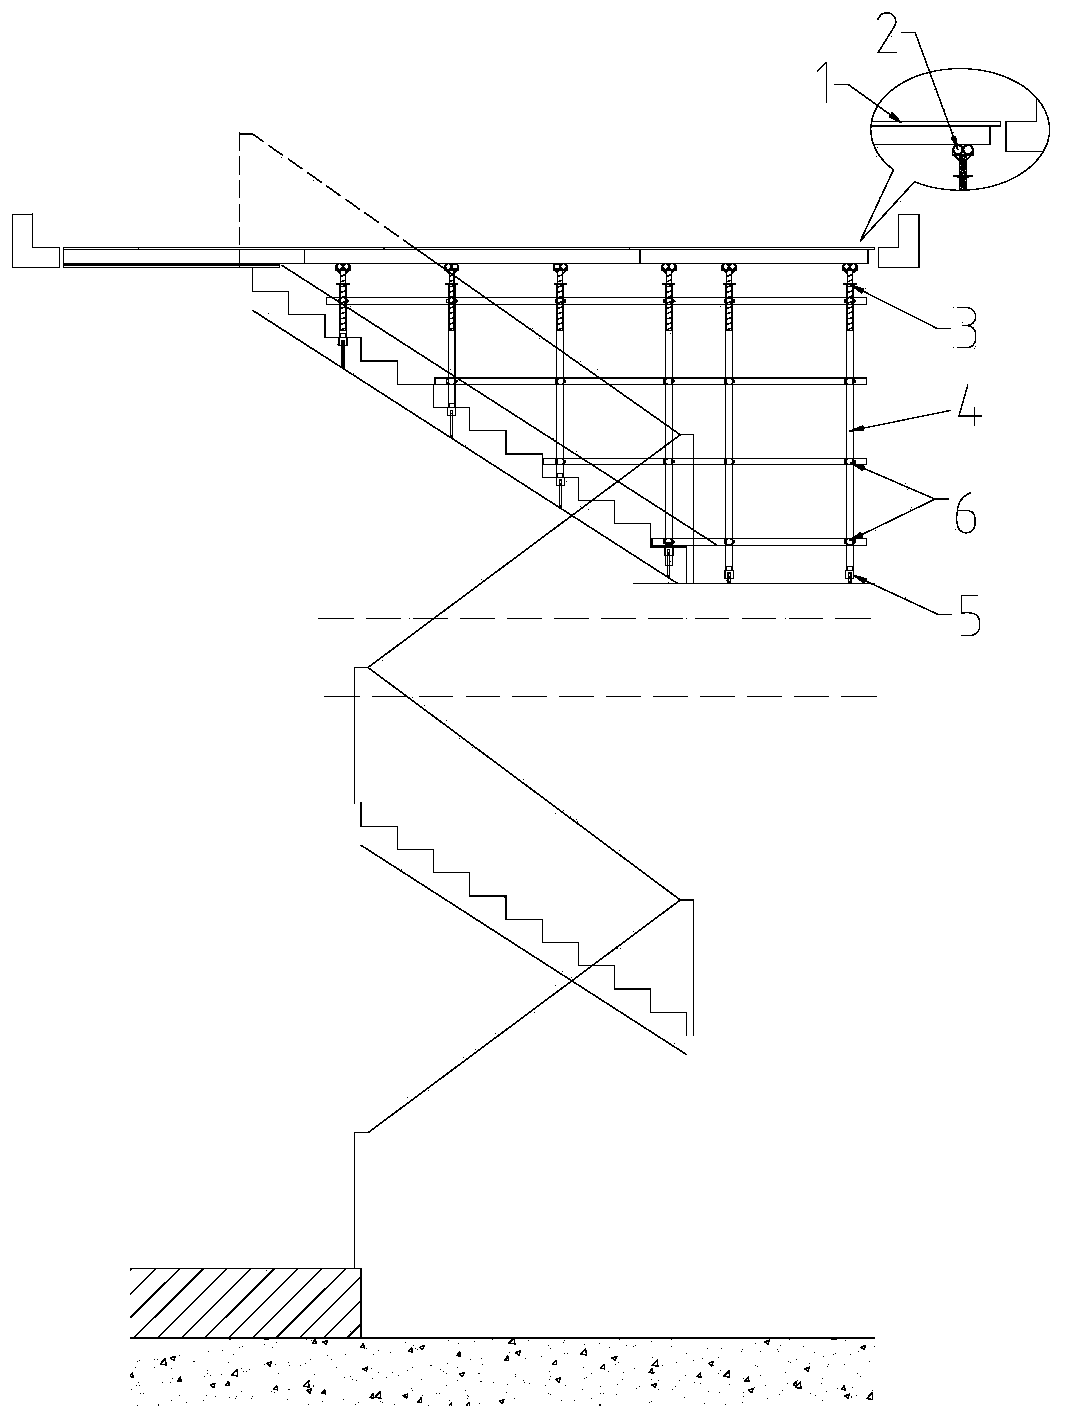 Construction method for cover plate of civil air defense stair